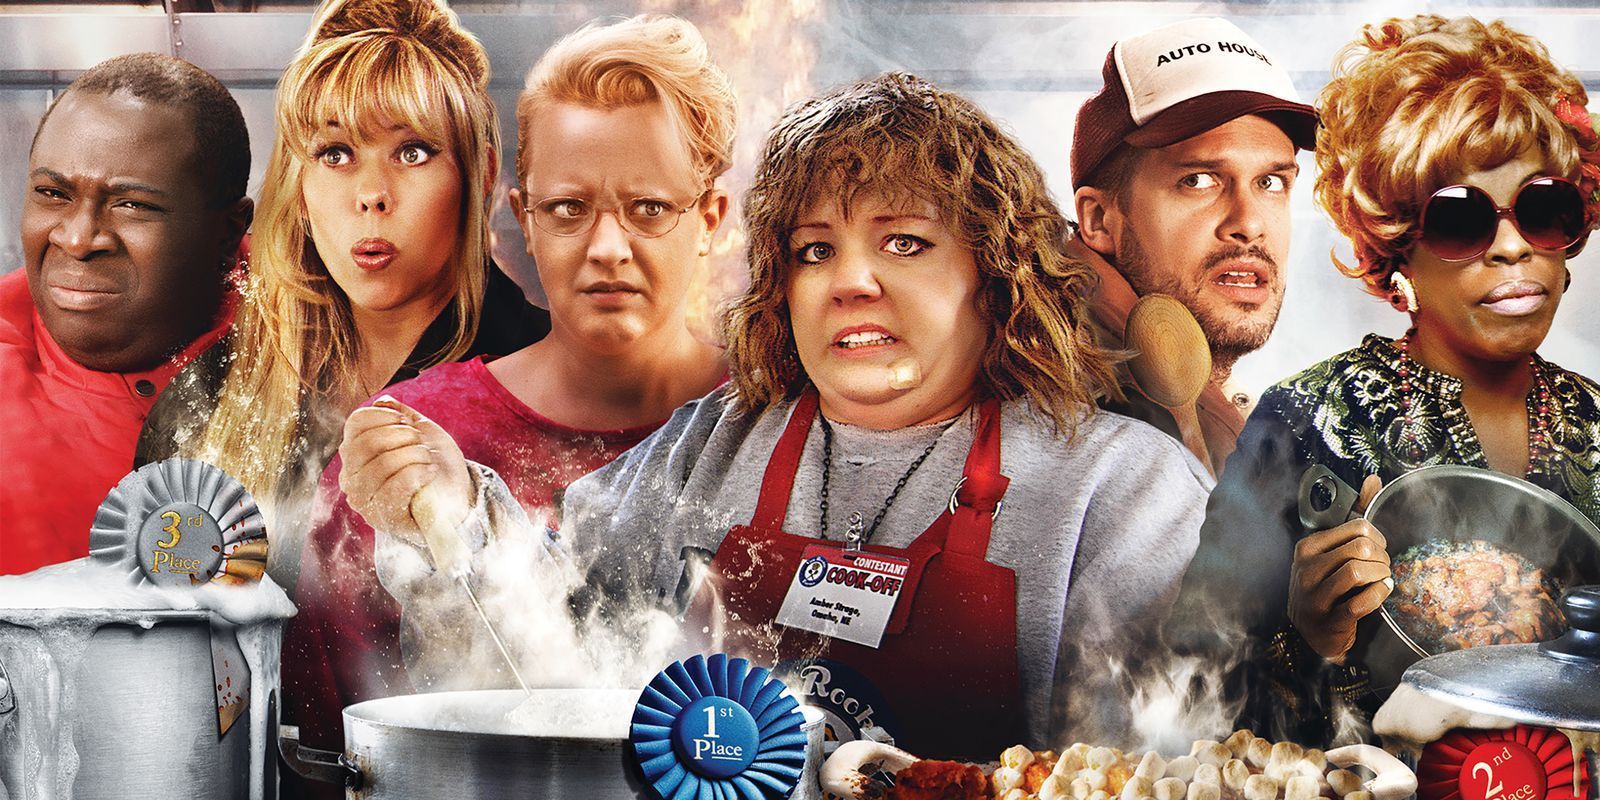 what is the food melissa mccarthy eats in the movie spy that they pour water on and it expands